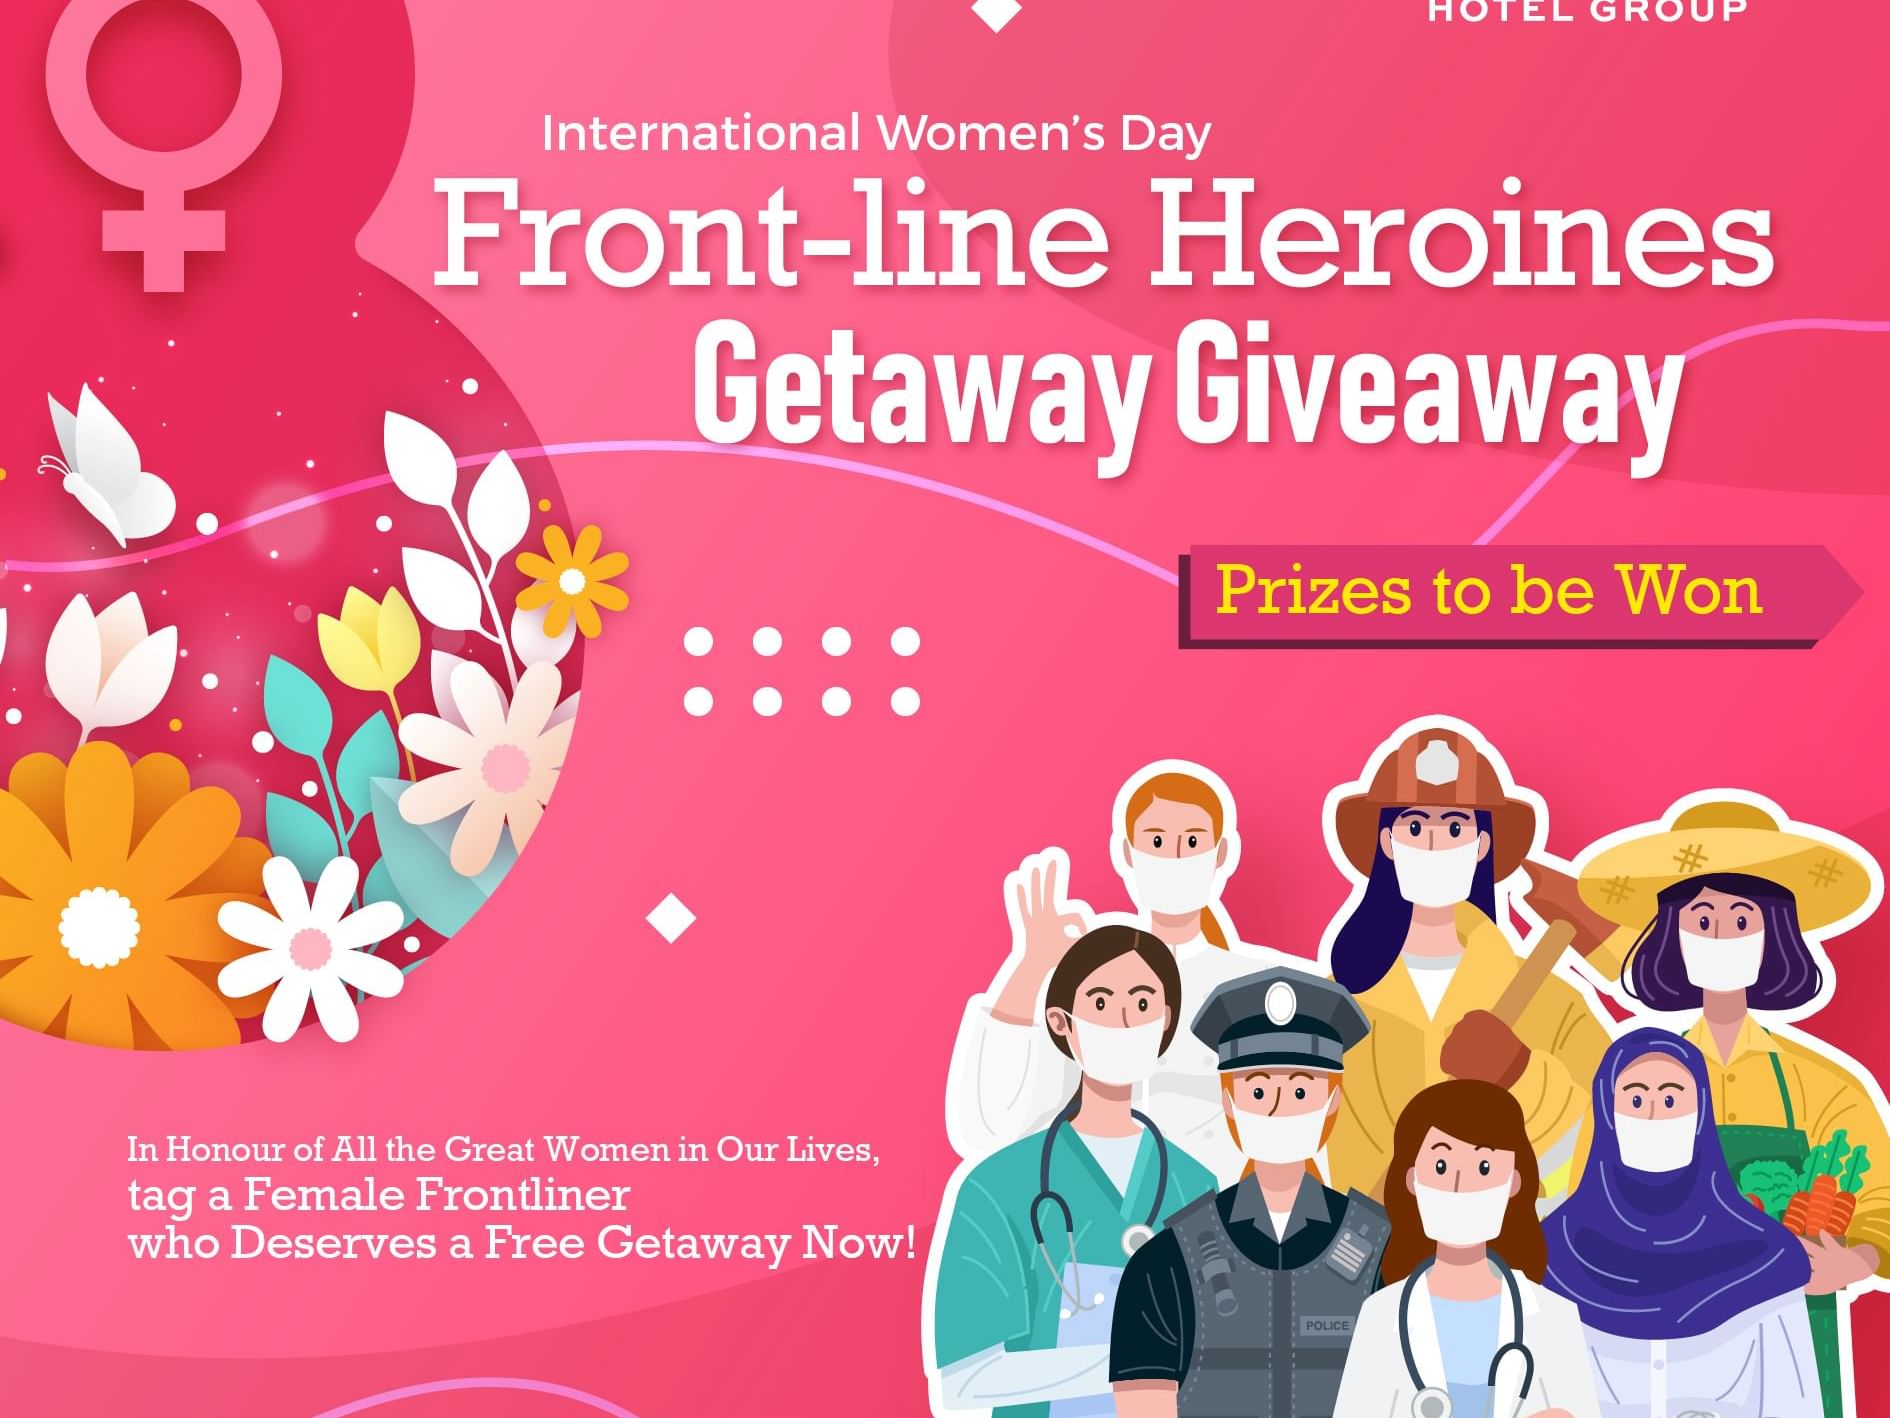 Lexis Hotel Group organised a free getaway giveaway on International Women's Day